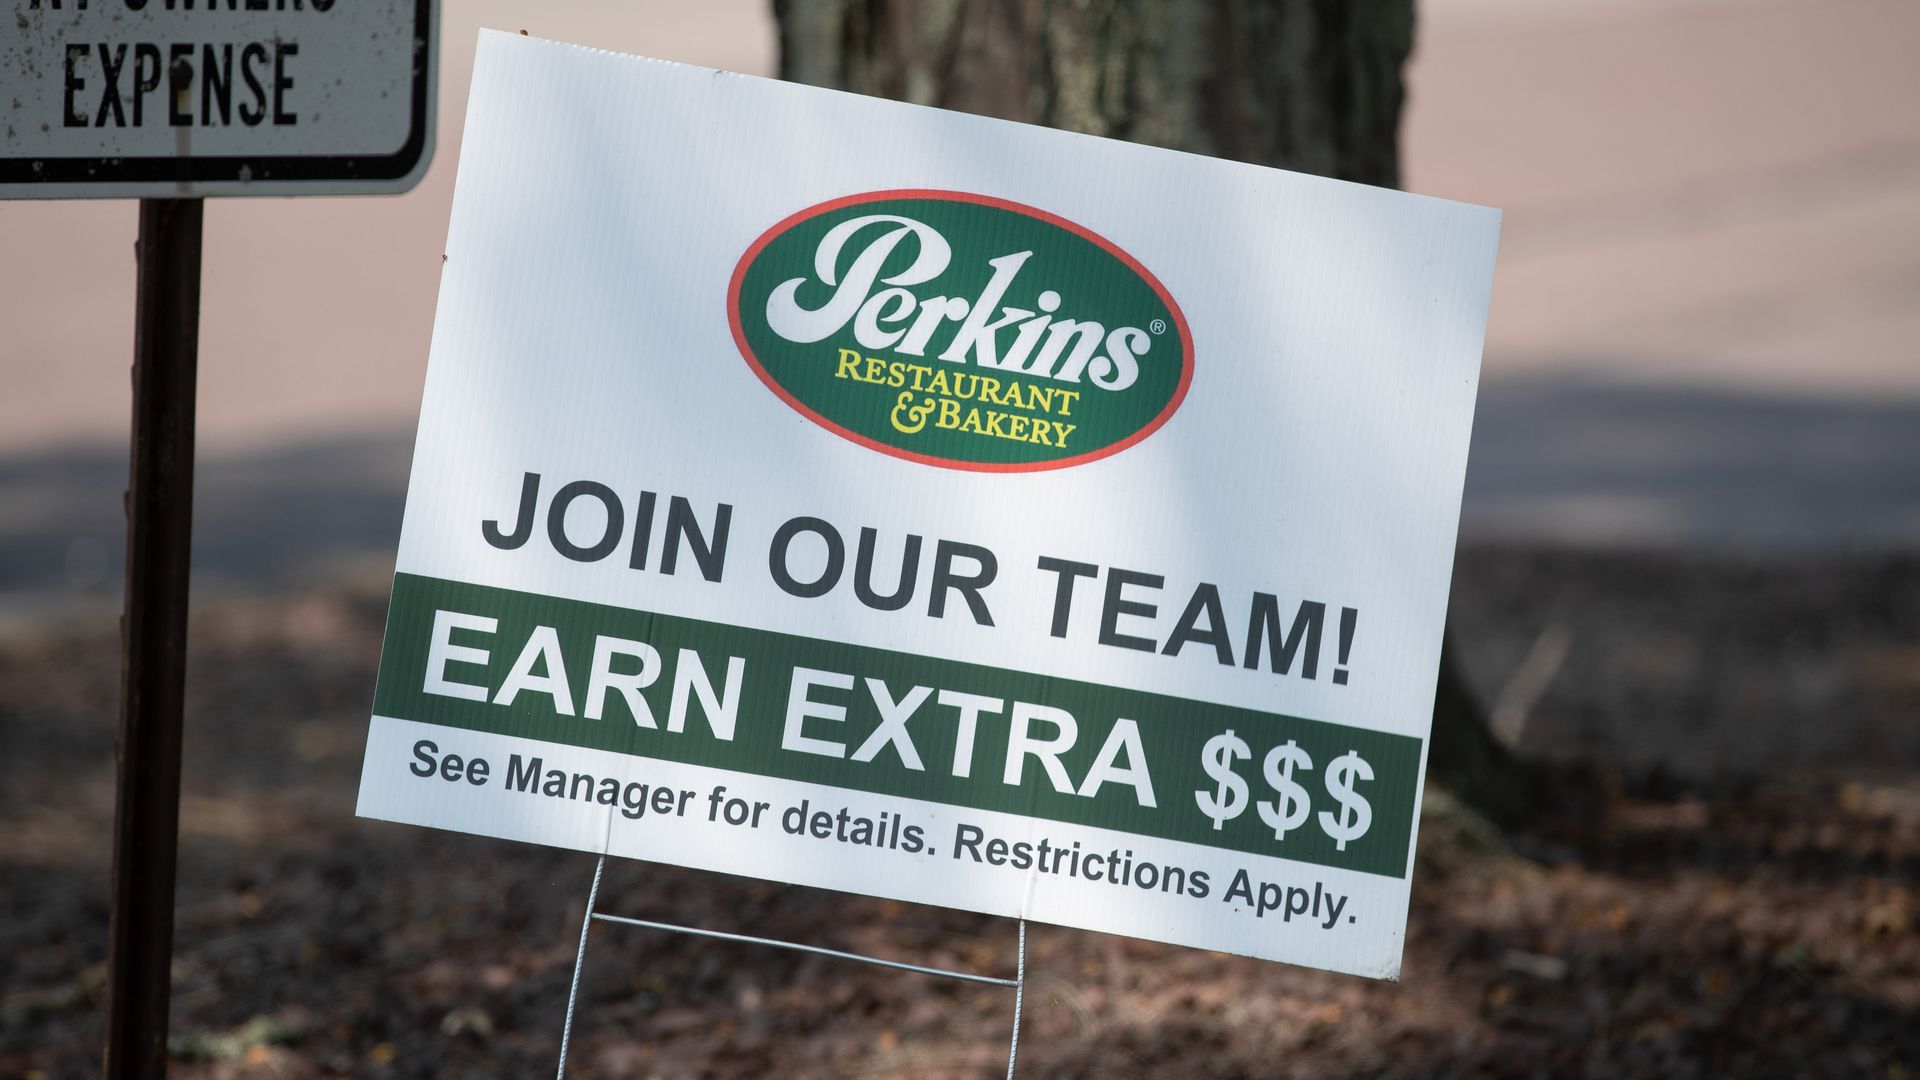 Photo of a sign that says "Join our team! Earn extra $$$"